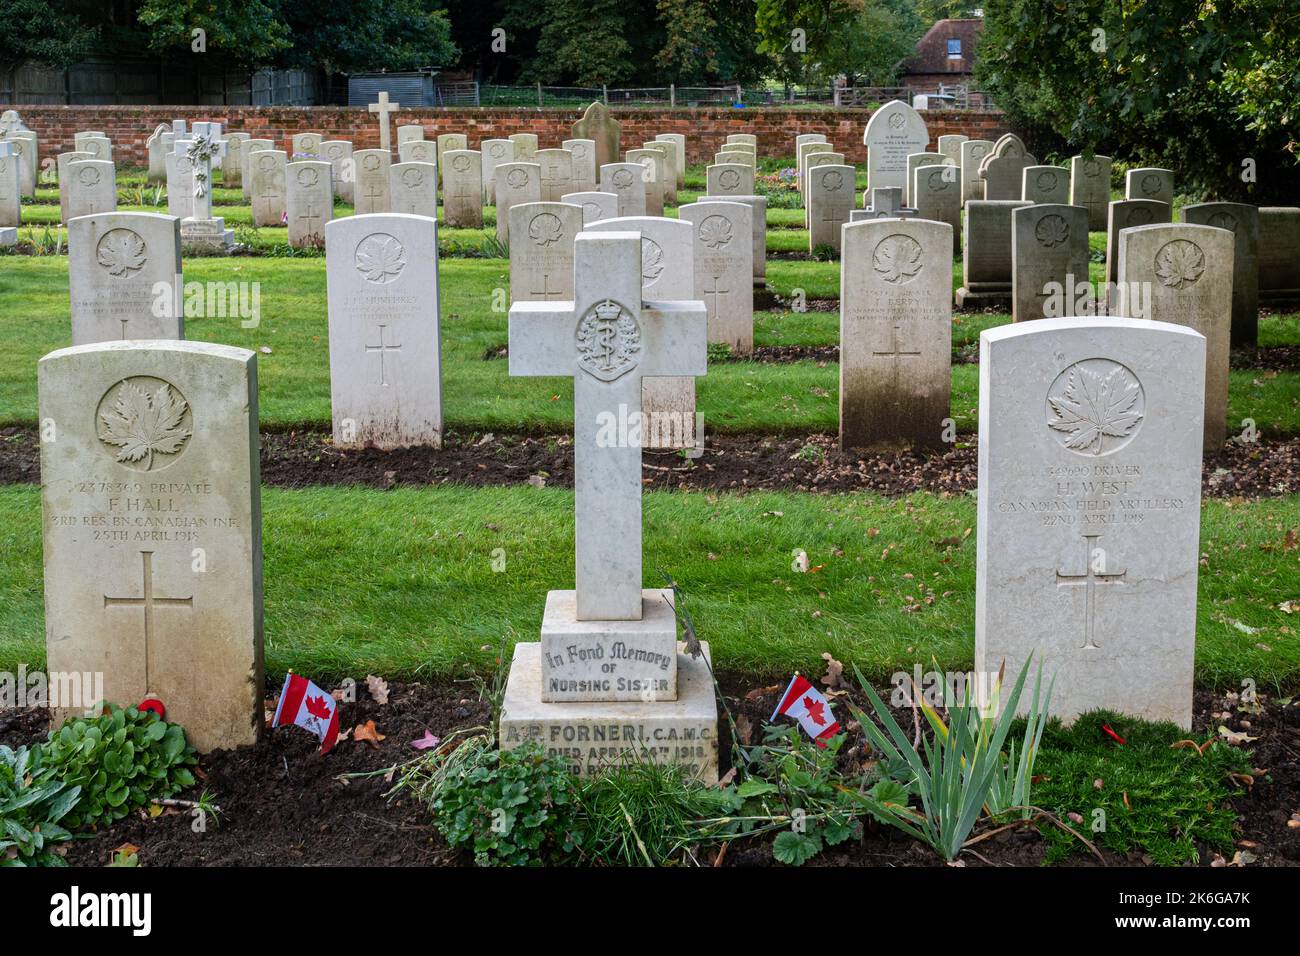 Graves of Canadian soldiers from the first world war in the churchyard of St Mary's Church in Bramshott, Hampshire, England, UK Stock Photo